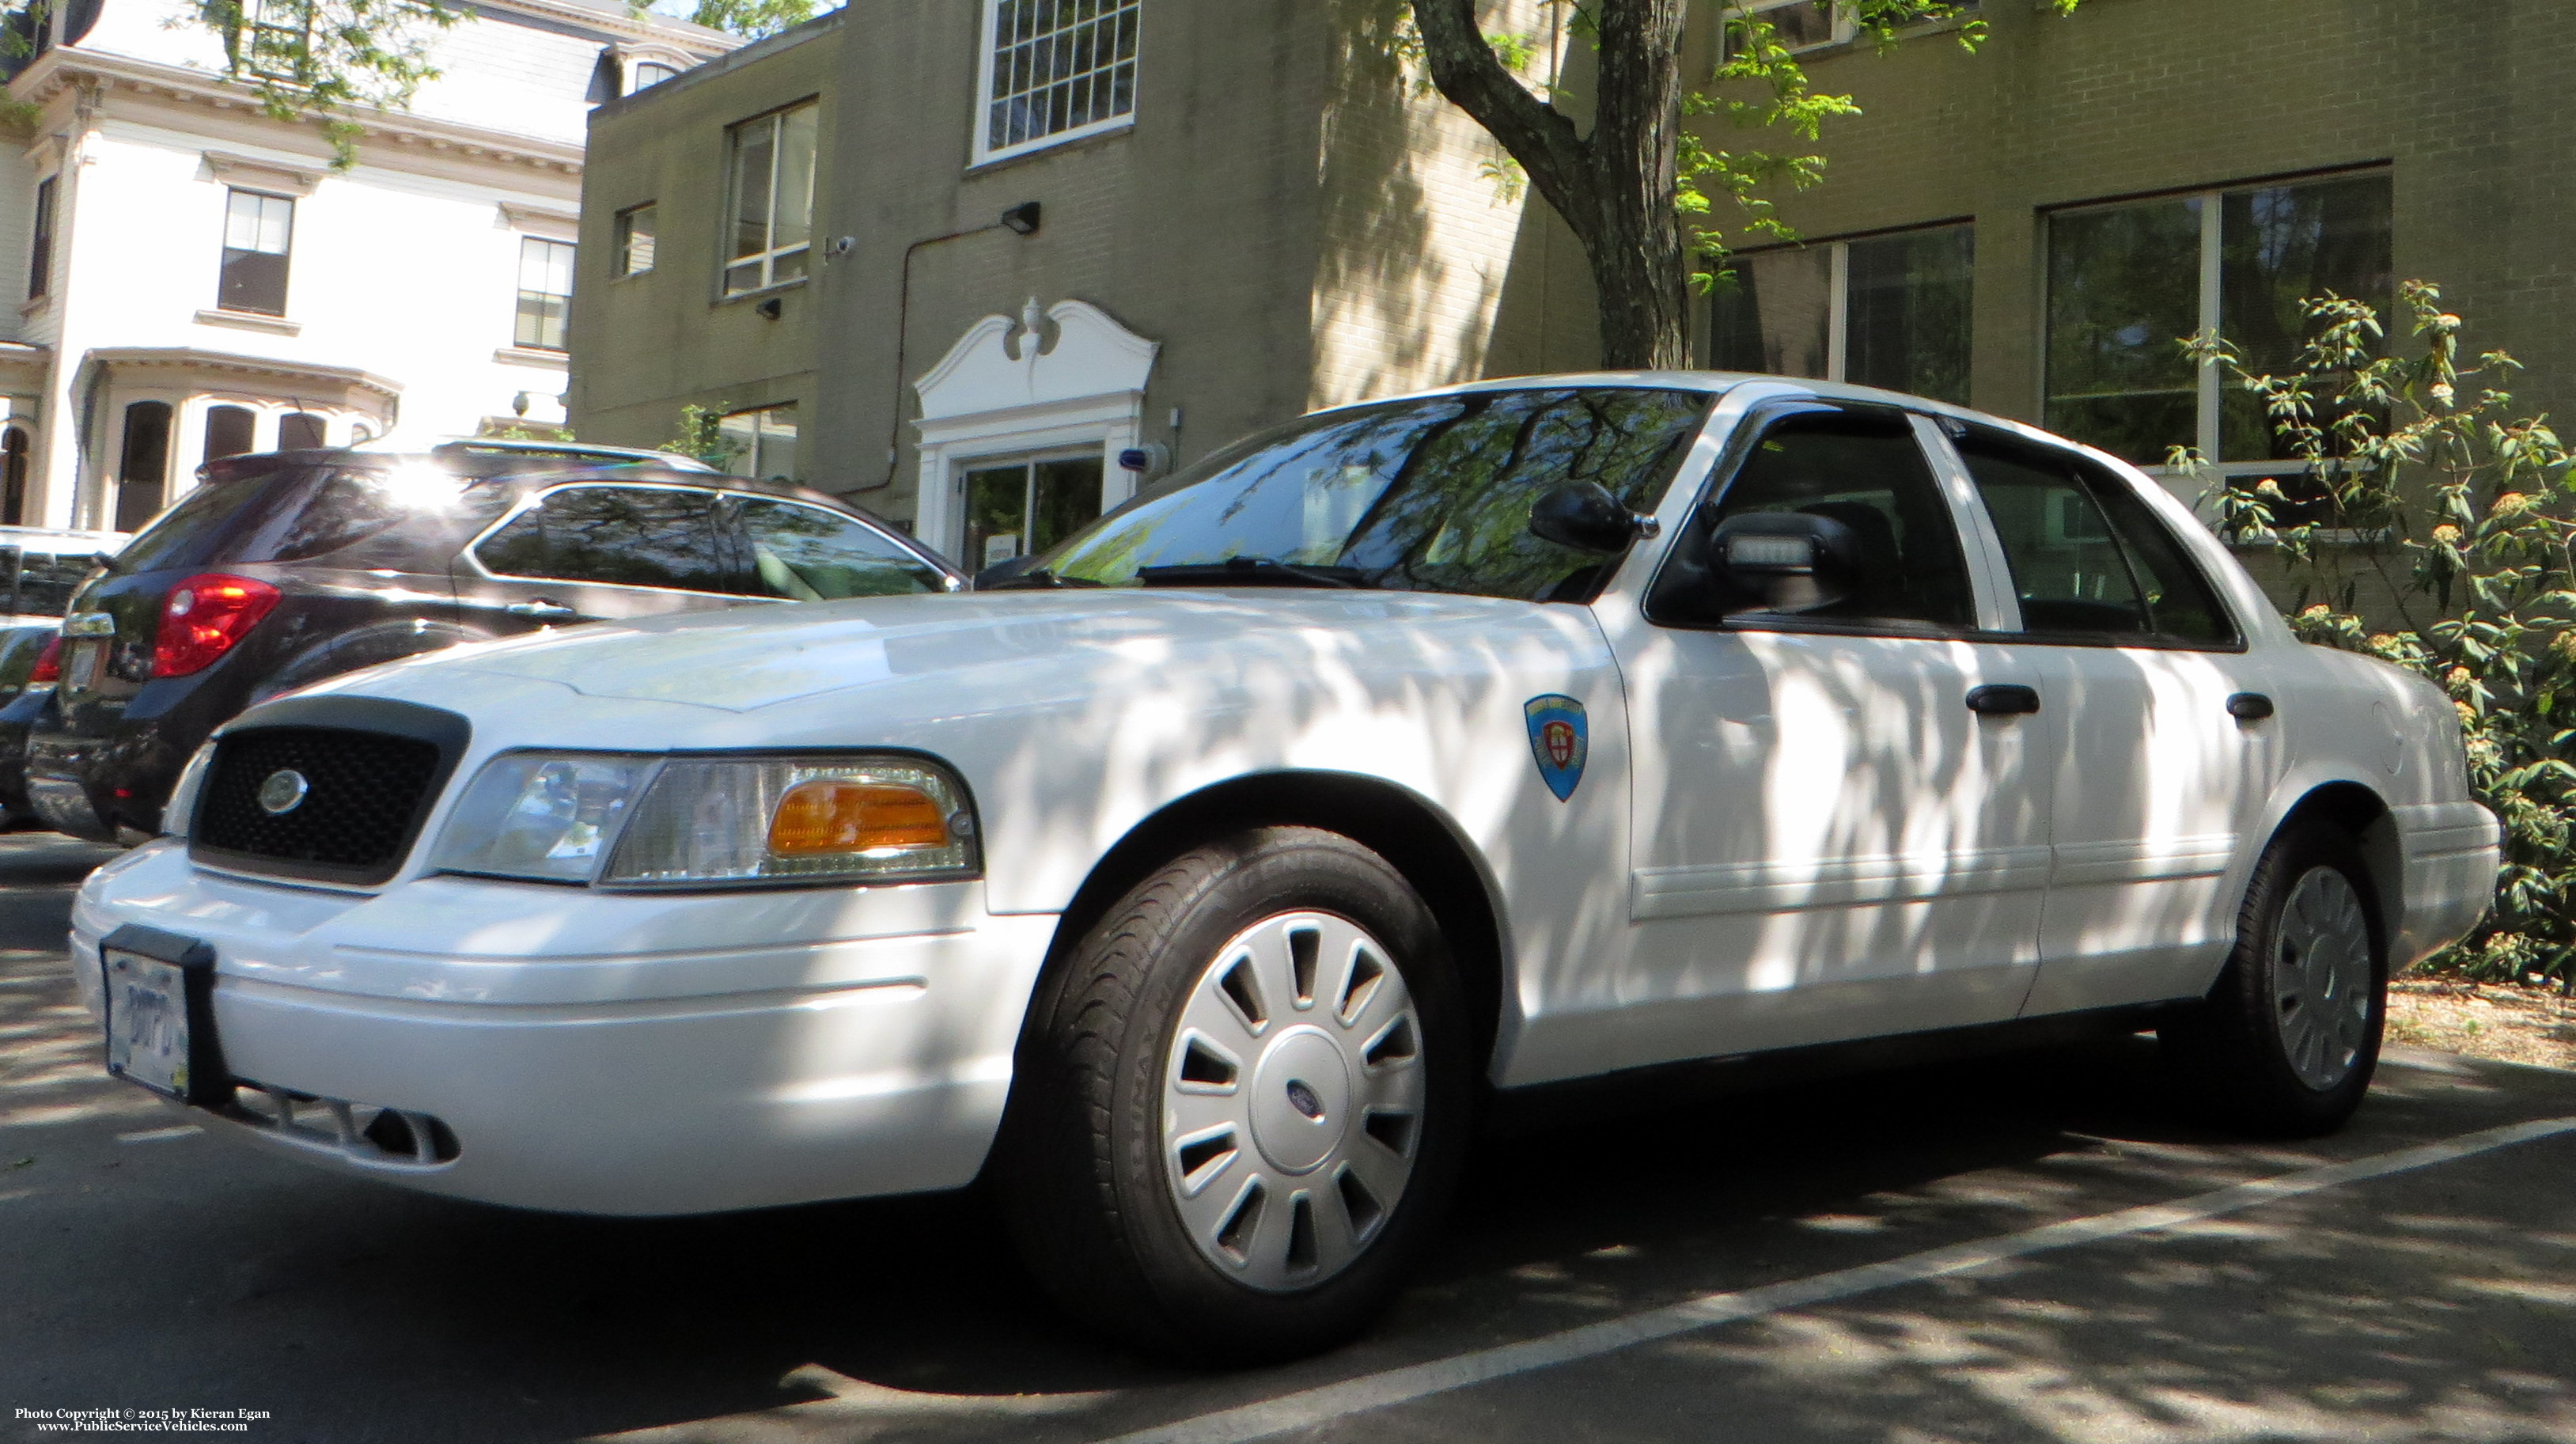 A photo  of Brown University Police
            Technical Support/Security, a 2009 Ford Crown Victoria Police Interceptor             taken by Kieran Egan